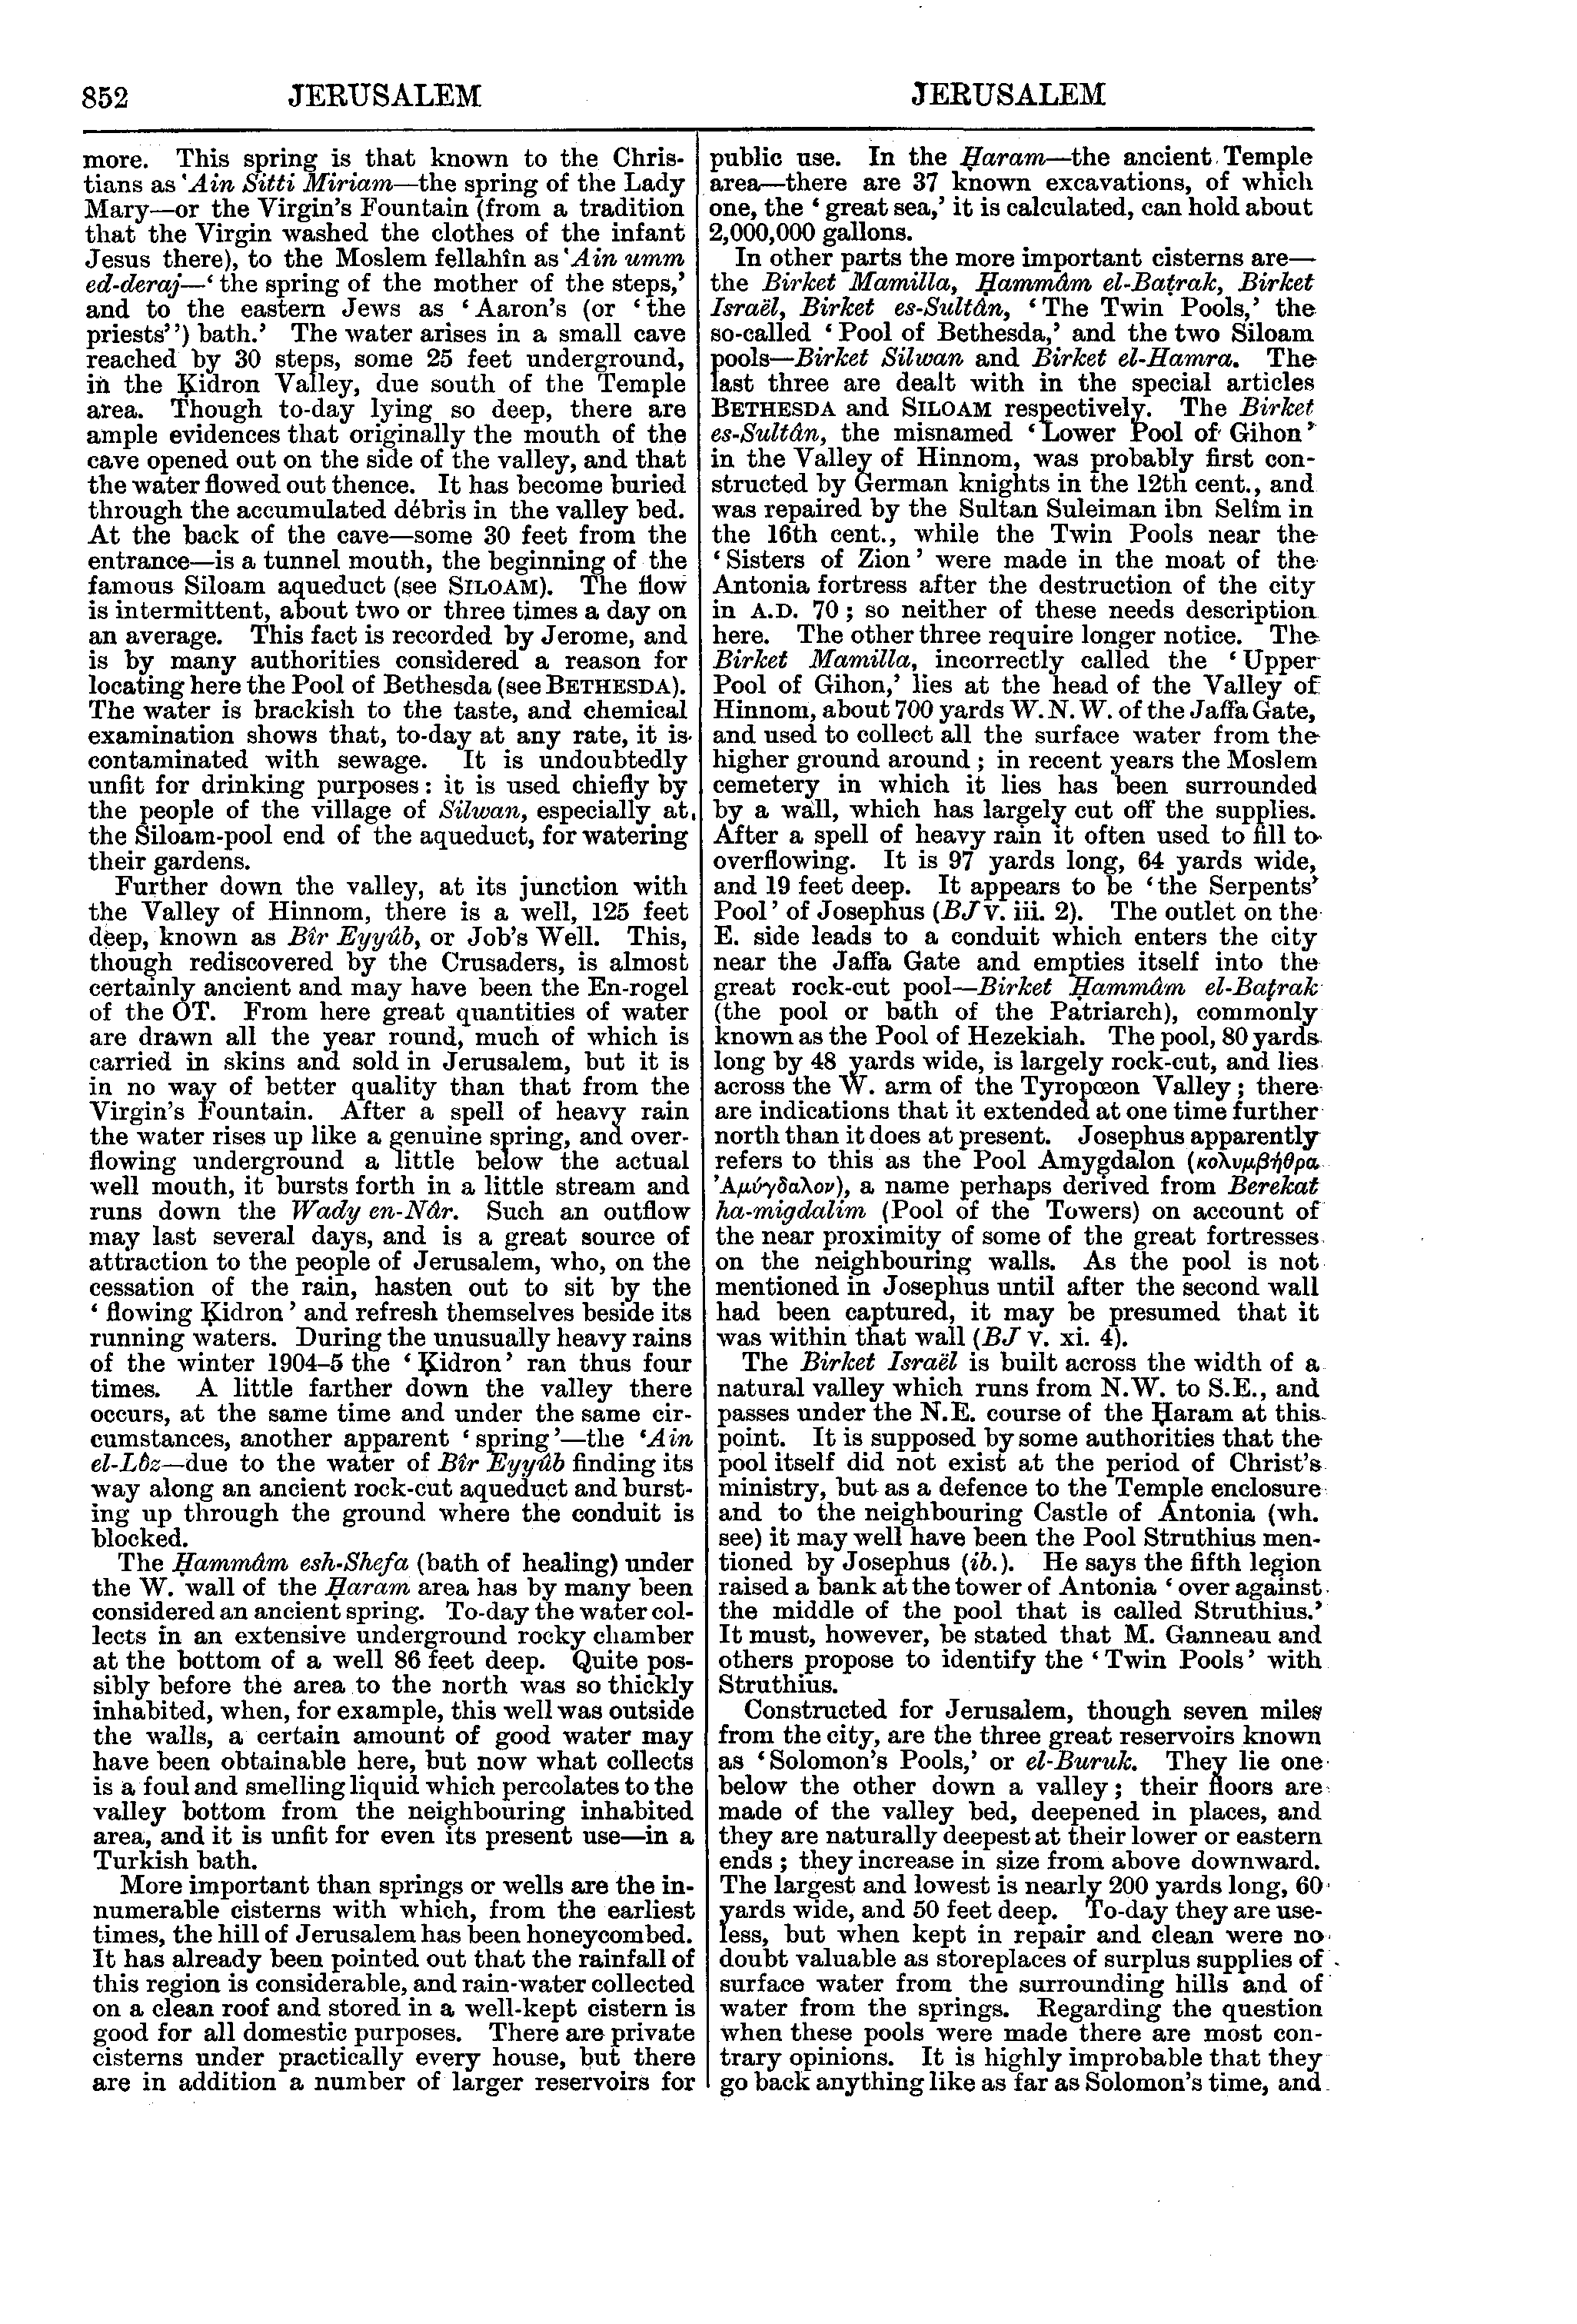 Image of page 852